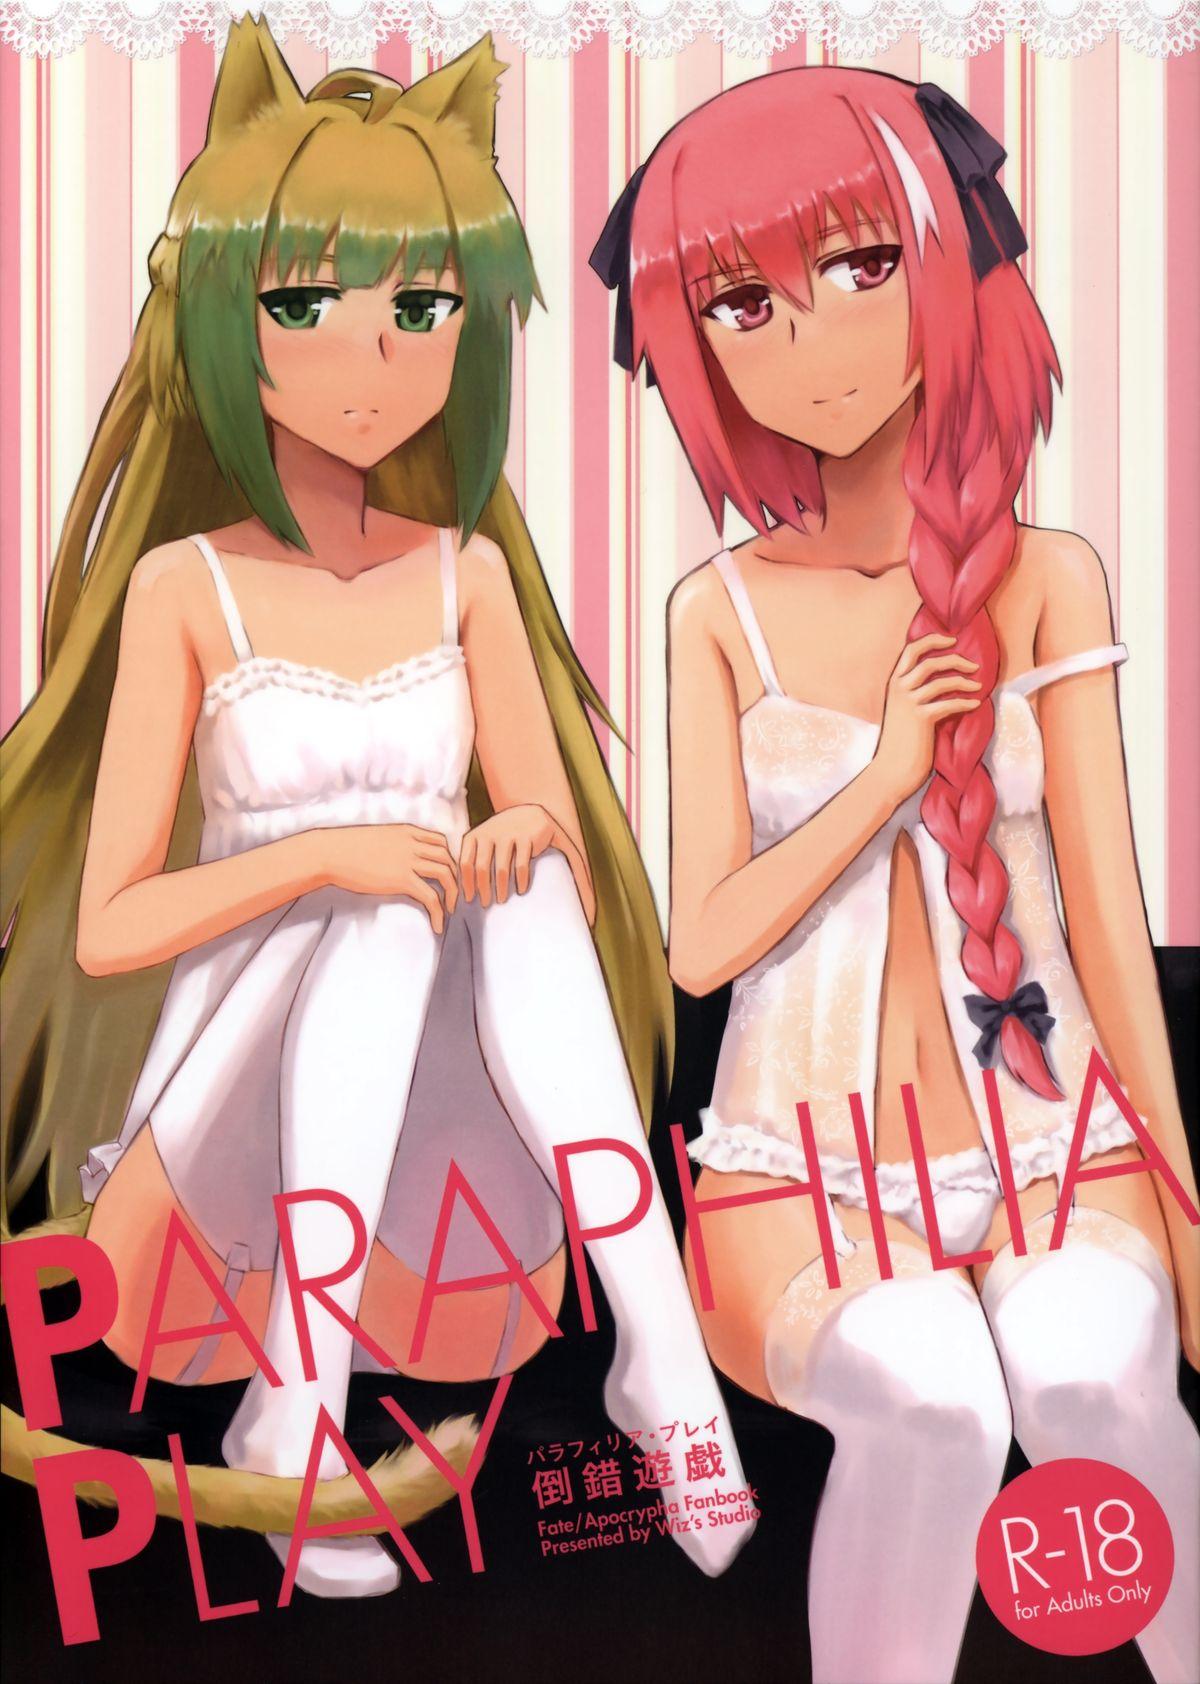 Amateurs Gone PARAPHILIA PLAY - Fate apocrypha Parody - Picture 1